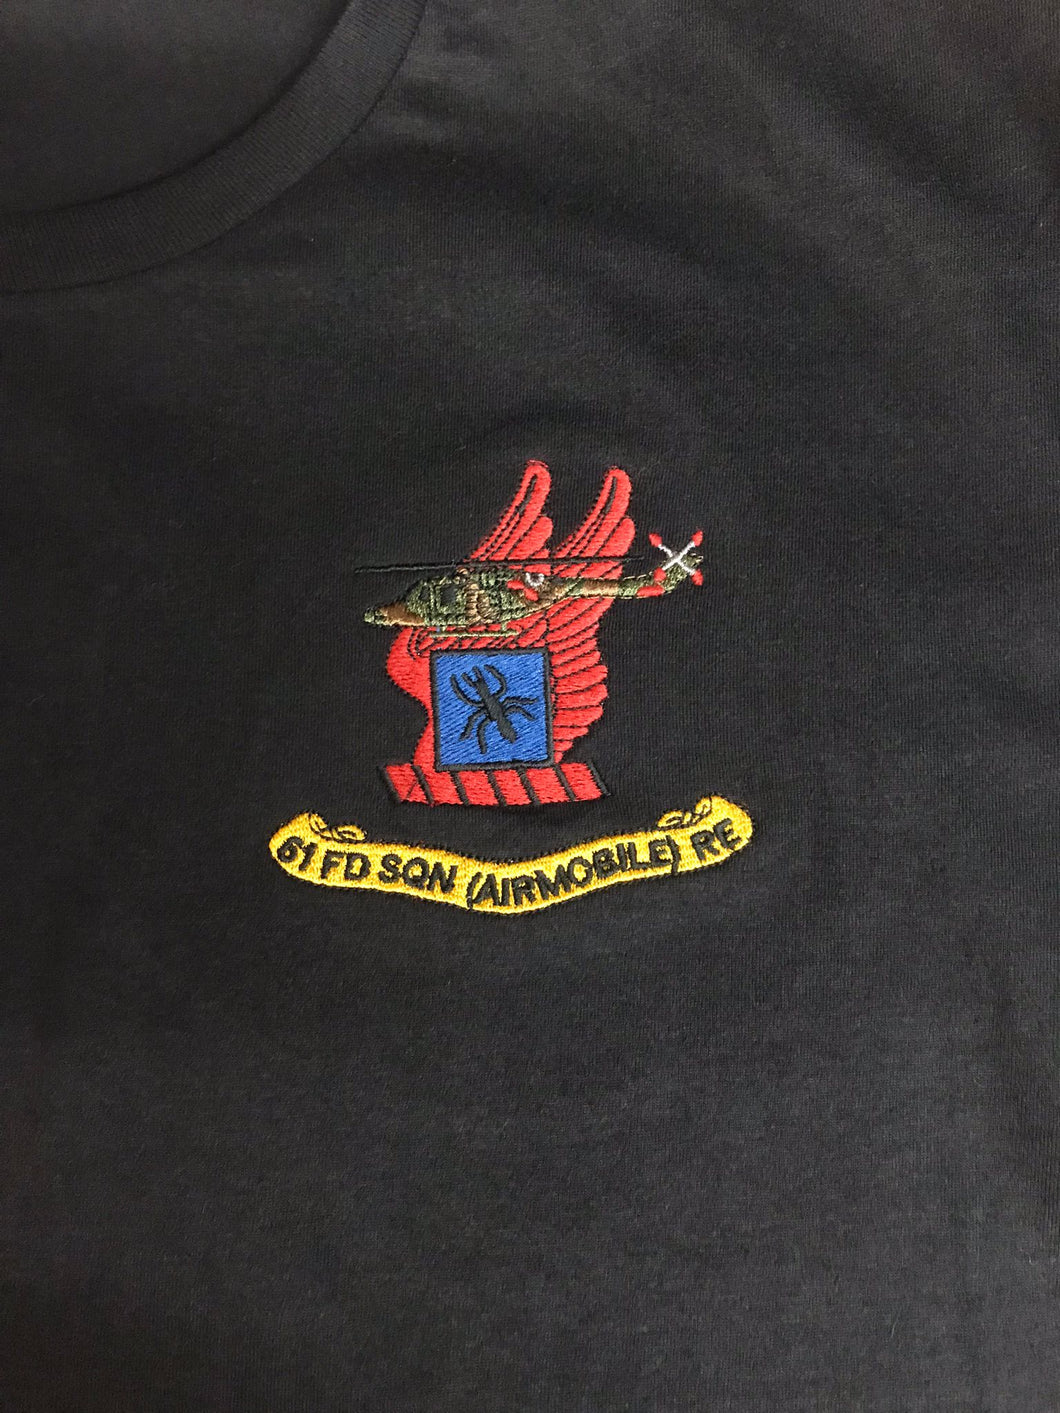 51 Field Squadron RE, 24 Airmobile Brigade (51 Fd Sqn RE) - Embroidered - Choose your Garment